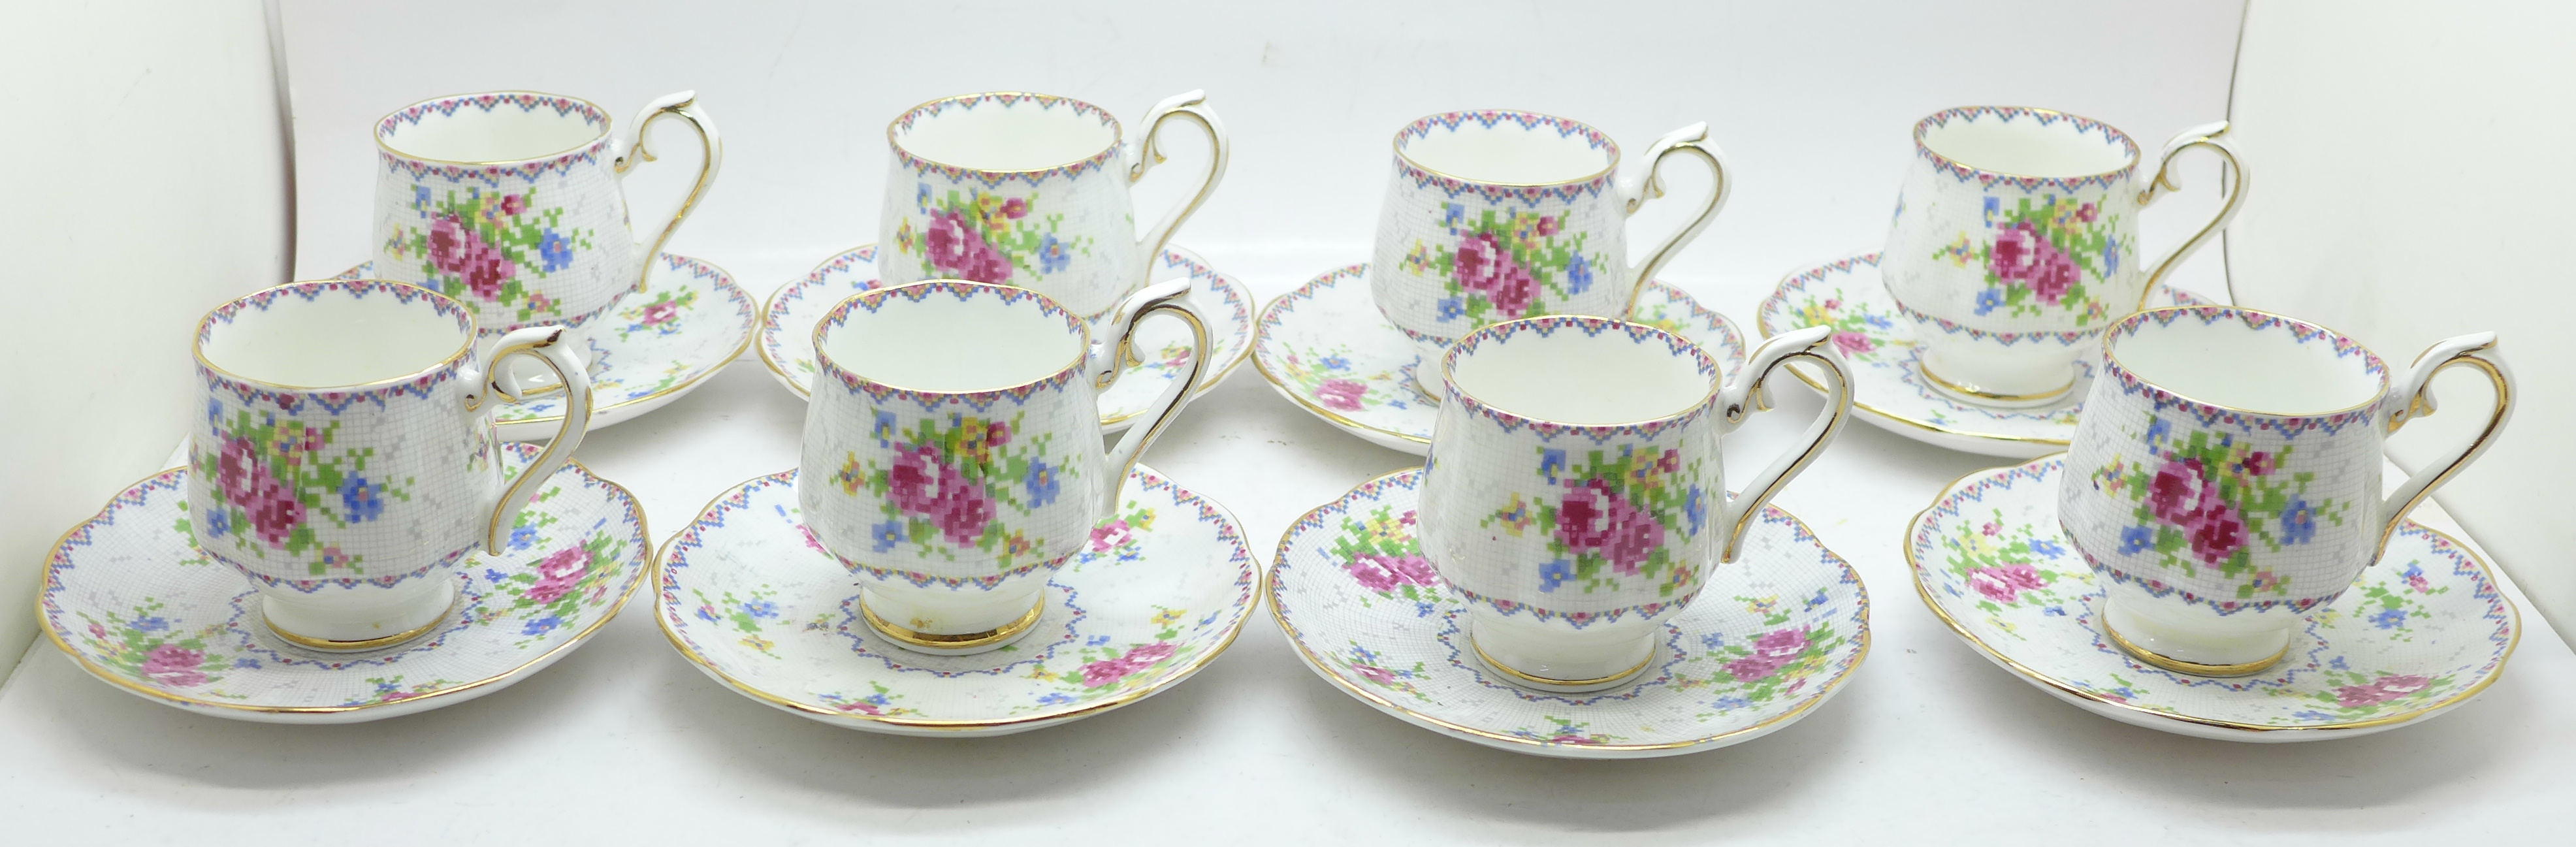 A Royal Albert Petit Point Chintz pattern demitasse cups and saucers